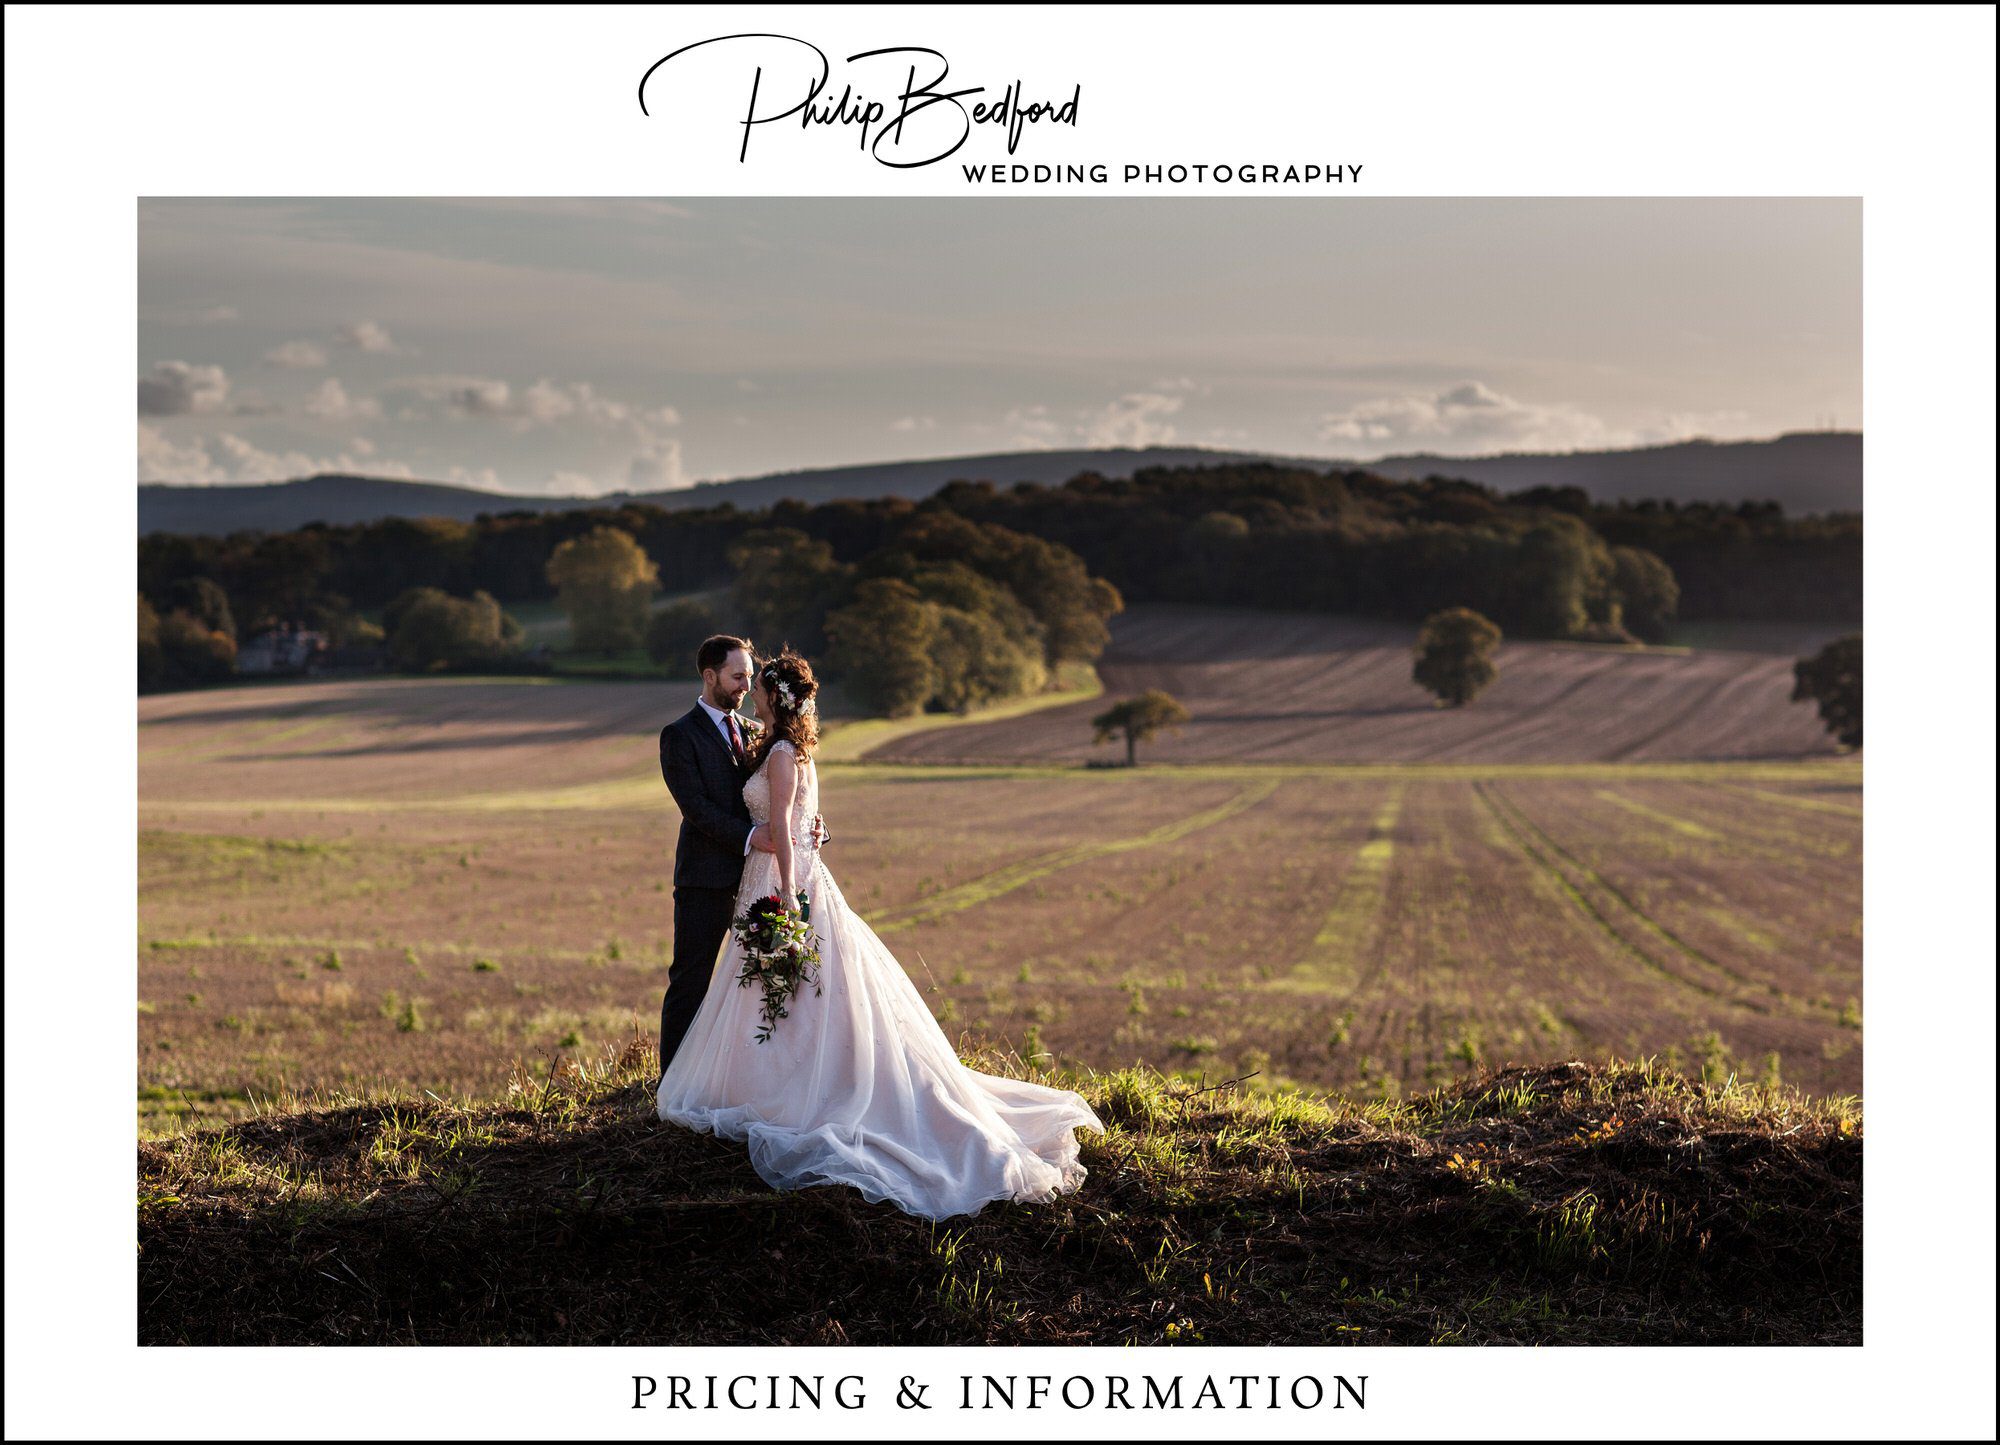 Wedding Photography Prices - Full Professional Wedding Photography Brochure